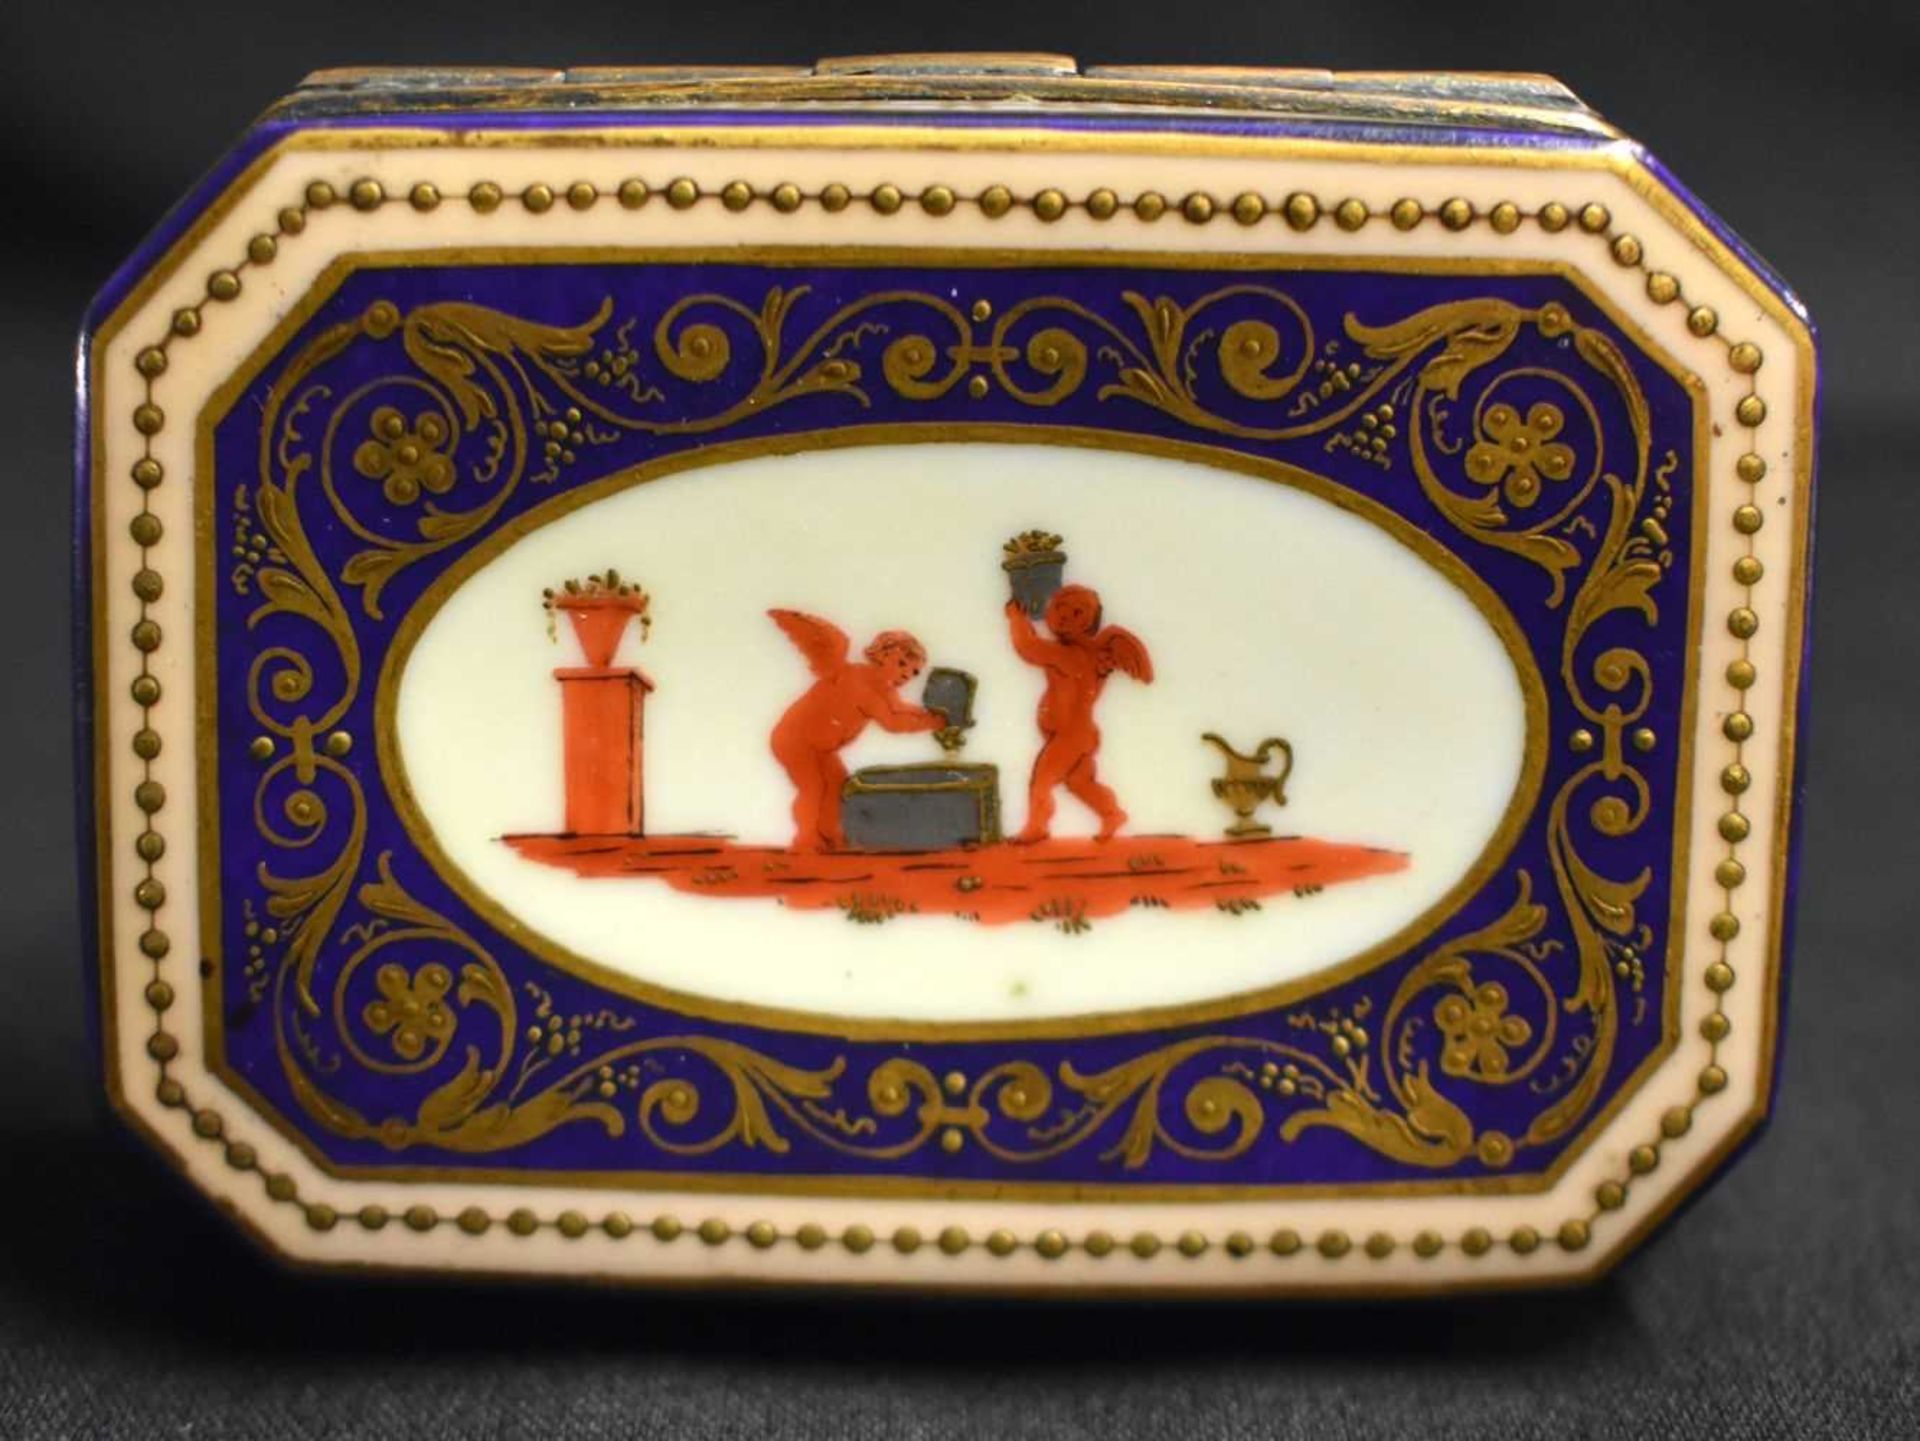 AN 18TH/19TH CENTURY AUSTRIAN VIENNA PORCELAIN BOX painted and jewelled in gilt with classical - Image 3 of 6